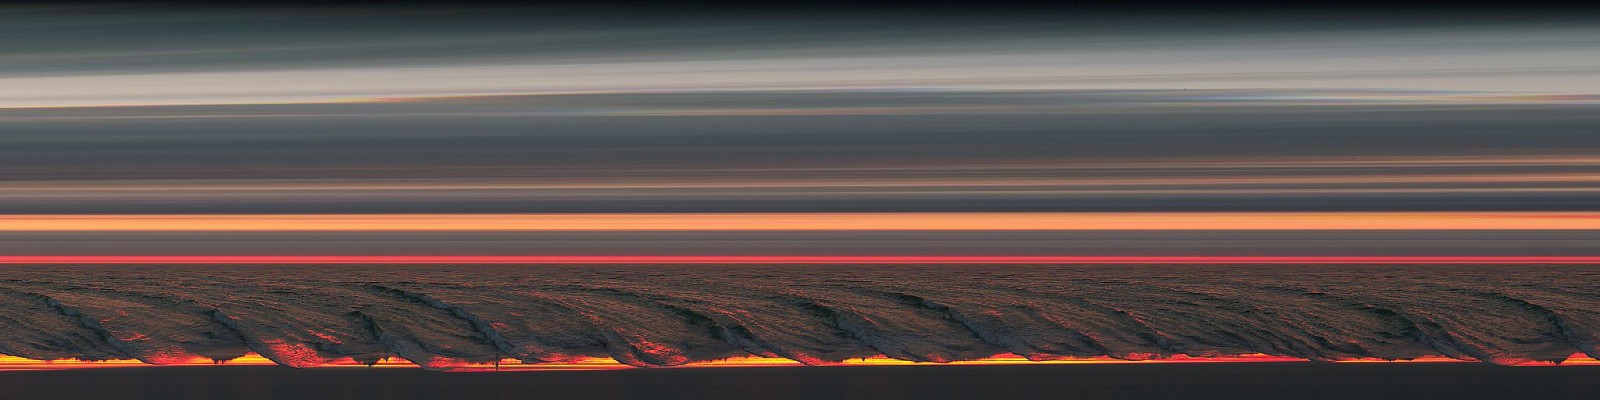 Jay Mark Johnson, FORT DE SOTO SUNSET WAVES #36, 2013 Fort De Soto, FL
archival pigment on paper, mounted on aluminum, 40 x 160 in. (101.6 x 406.4 cm)